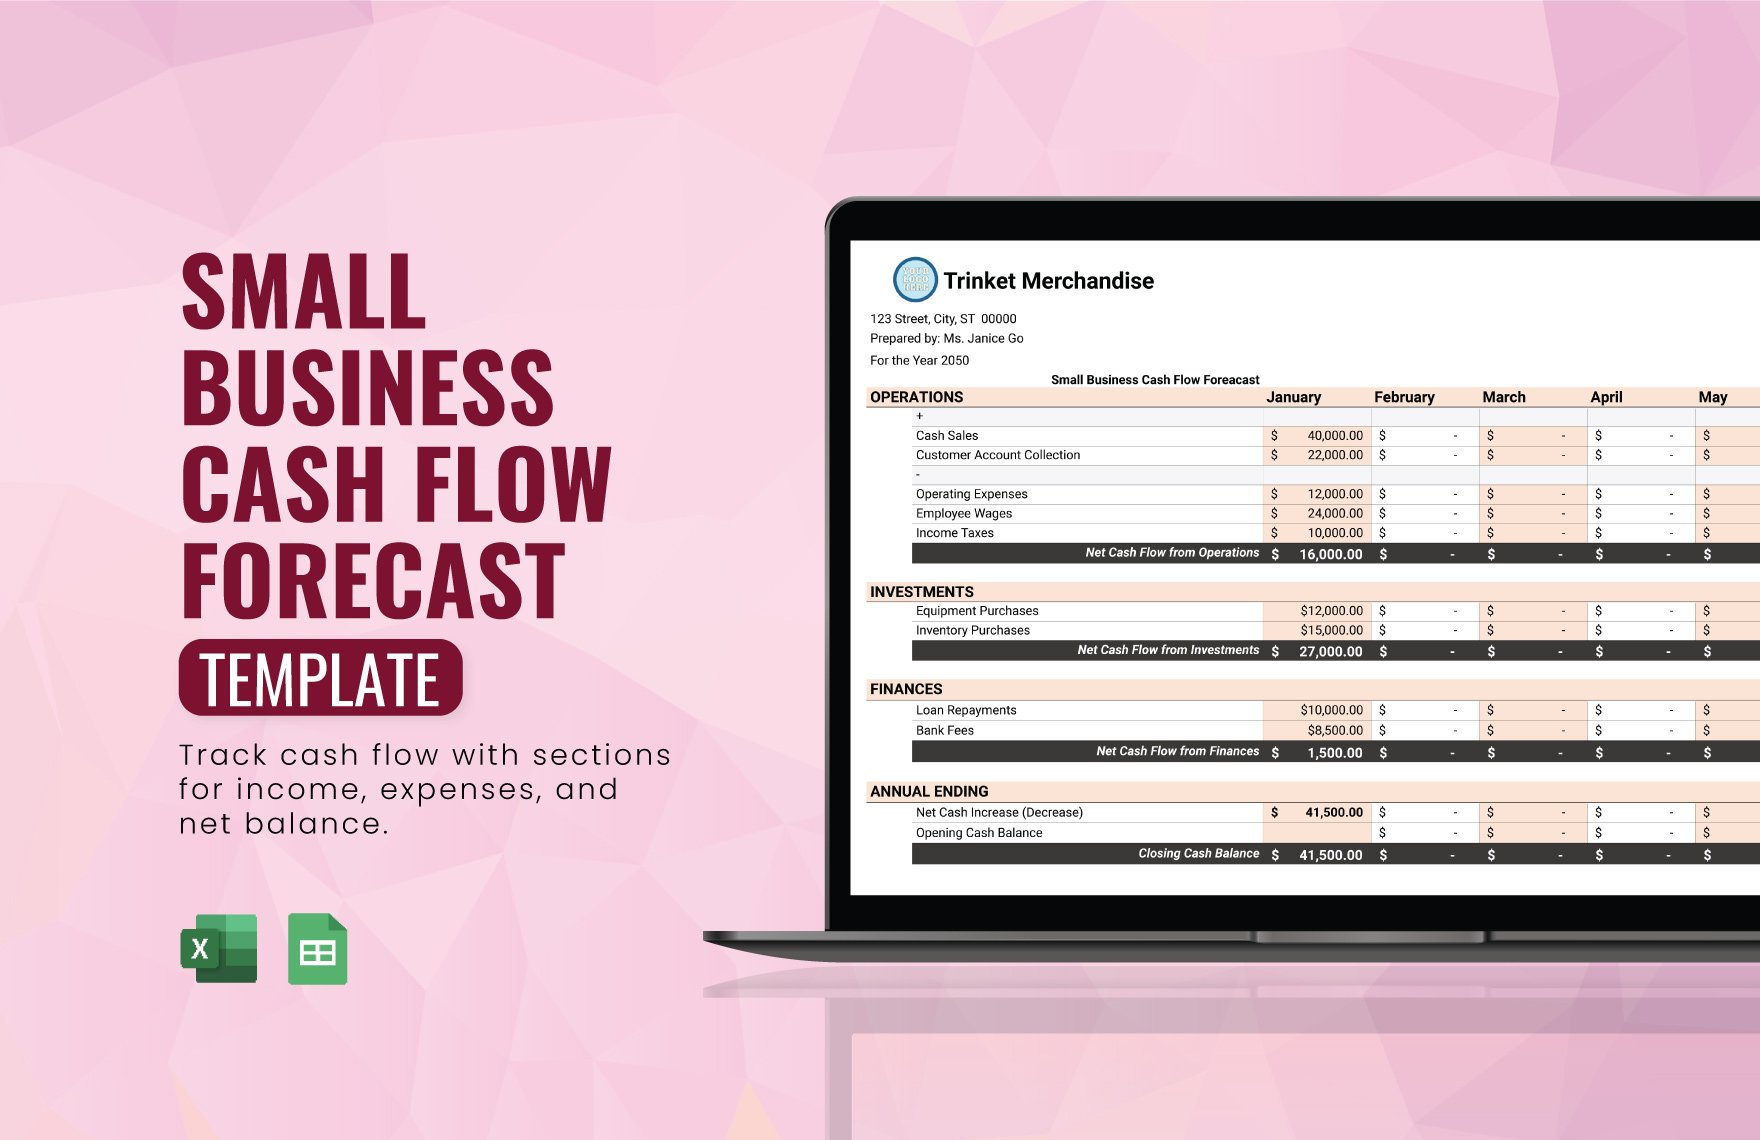 Free Small Business Cash Flow Forecast Template in Excel, Google Sheets